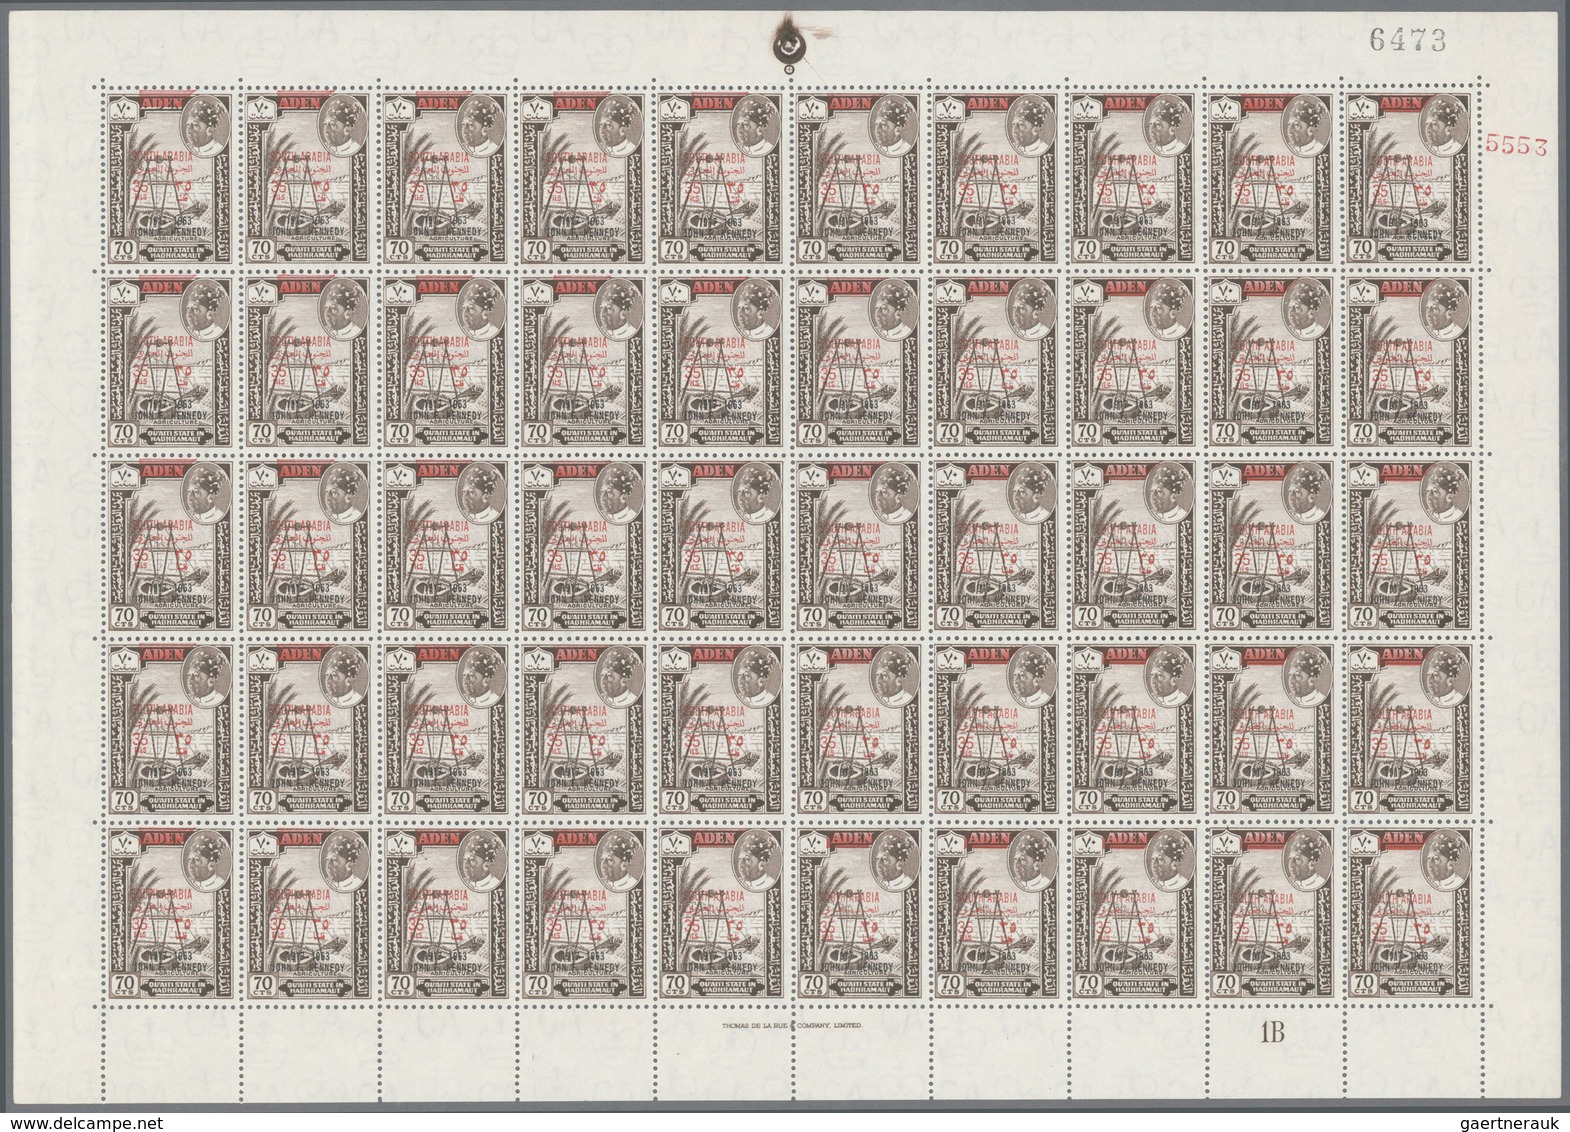 22027 Aden - Qu'aiti State In Hadhramaut: 1966, Definitives With Red Bilingual Opt. 'SOUTH ARABIA' And Add - Yémen